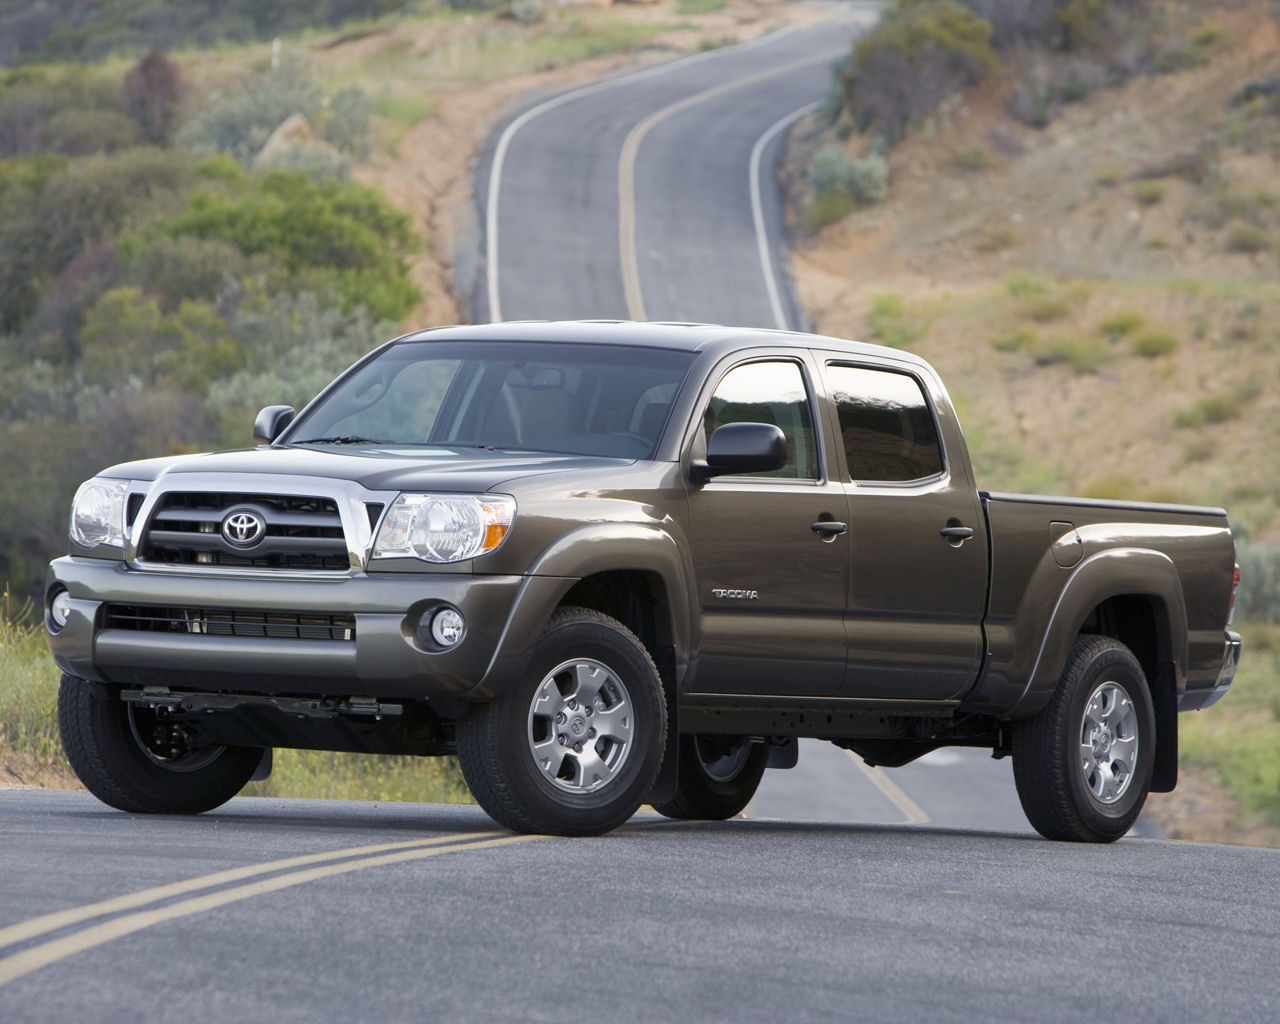 Toyota Tacoma Wallpaper 5525 Hd Wallpapers in Cars   Imagescicom